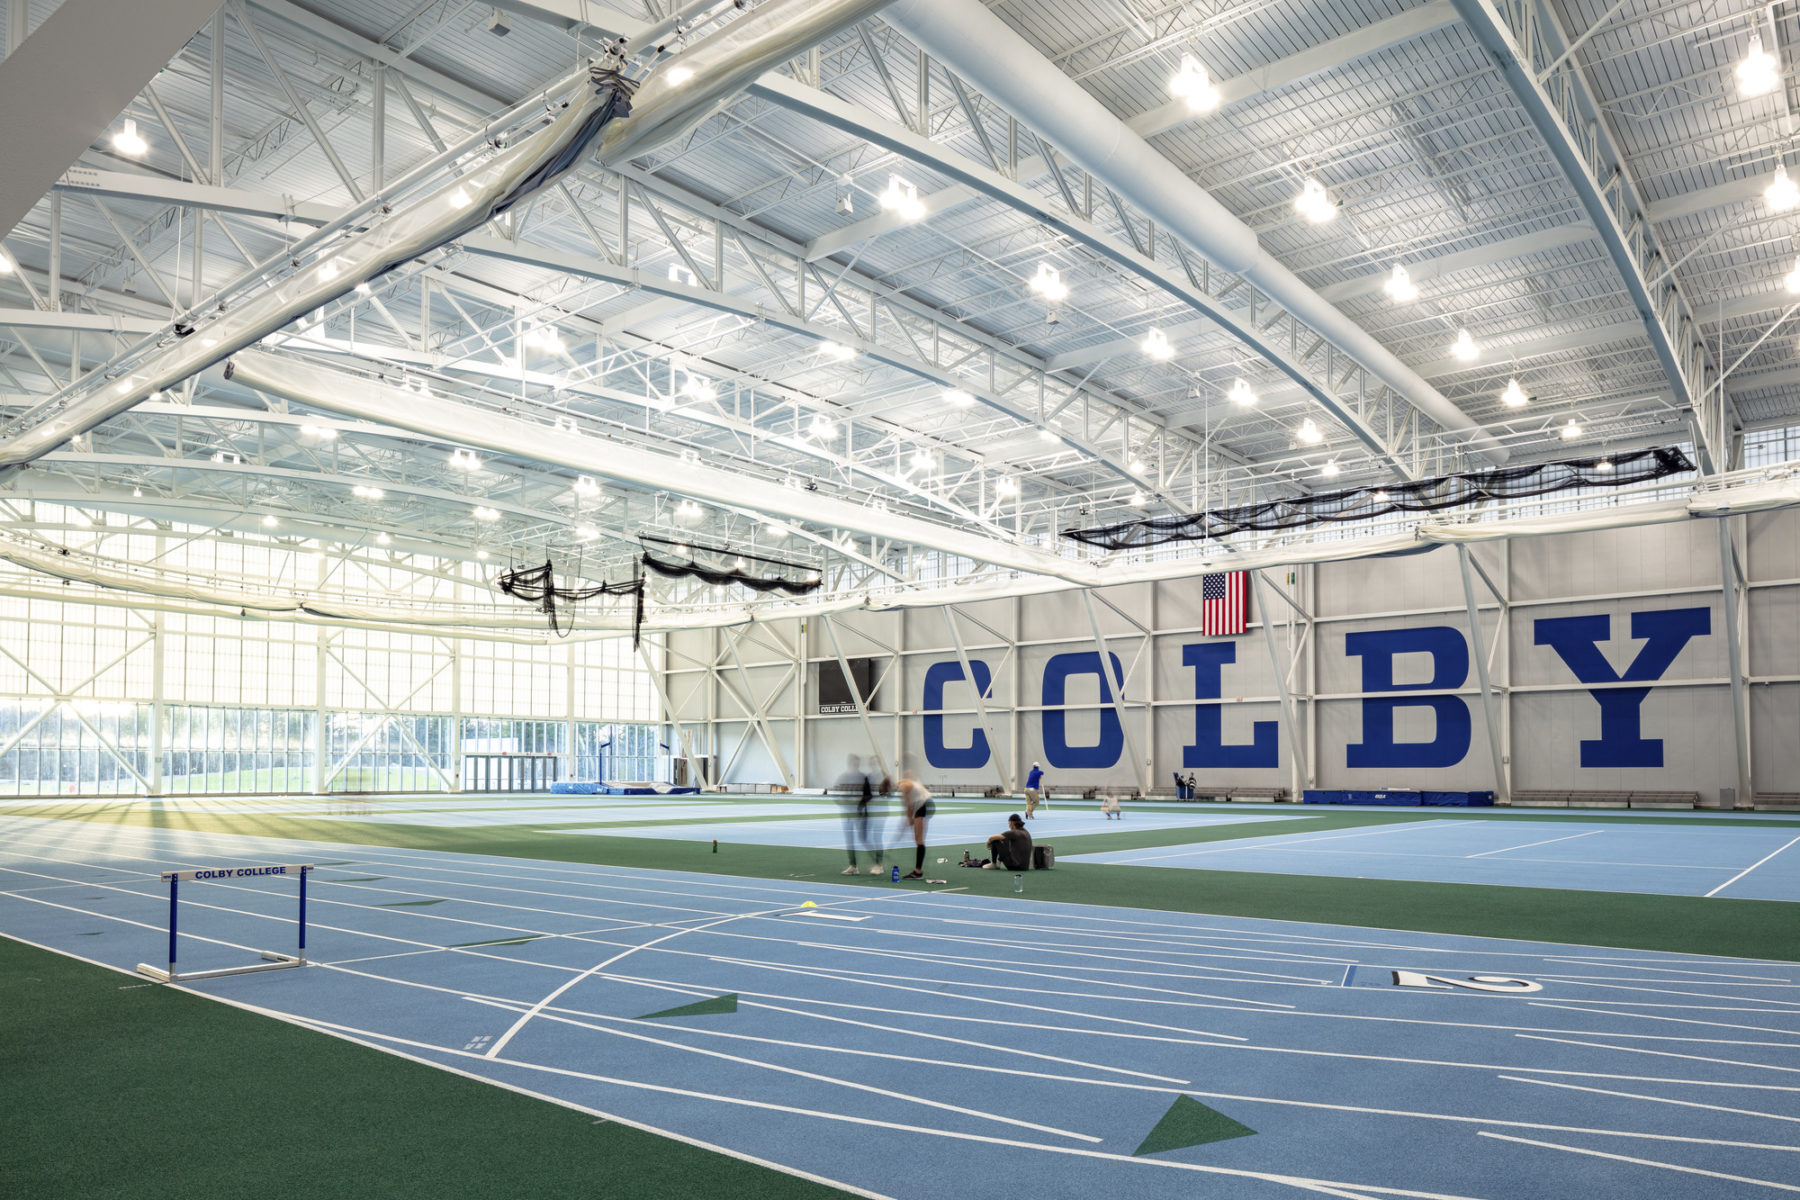 interior photo of field house, large letters that spell Colby adorn the walls